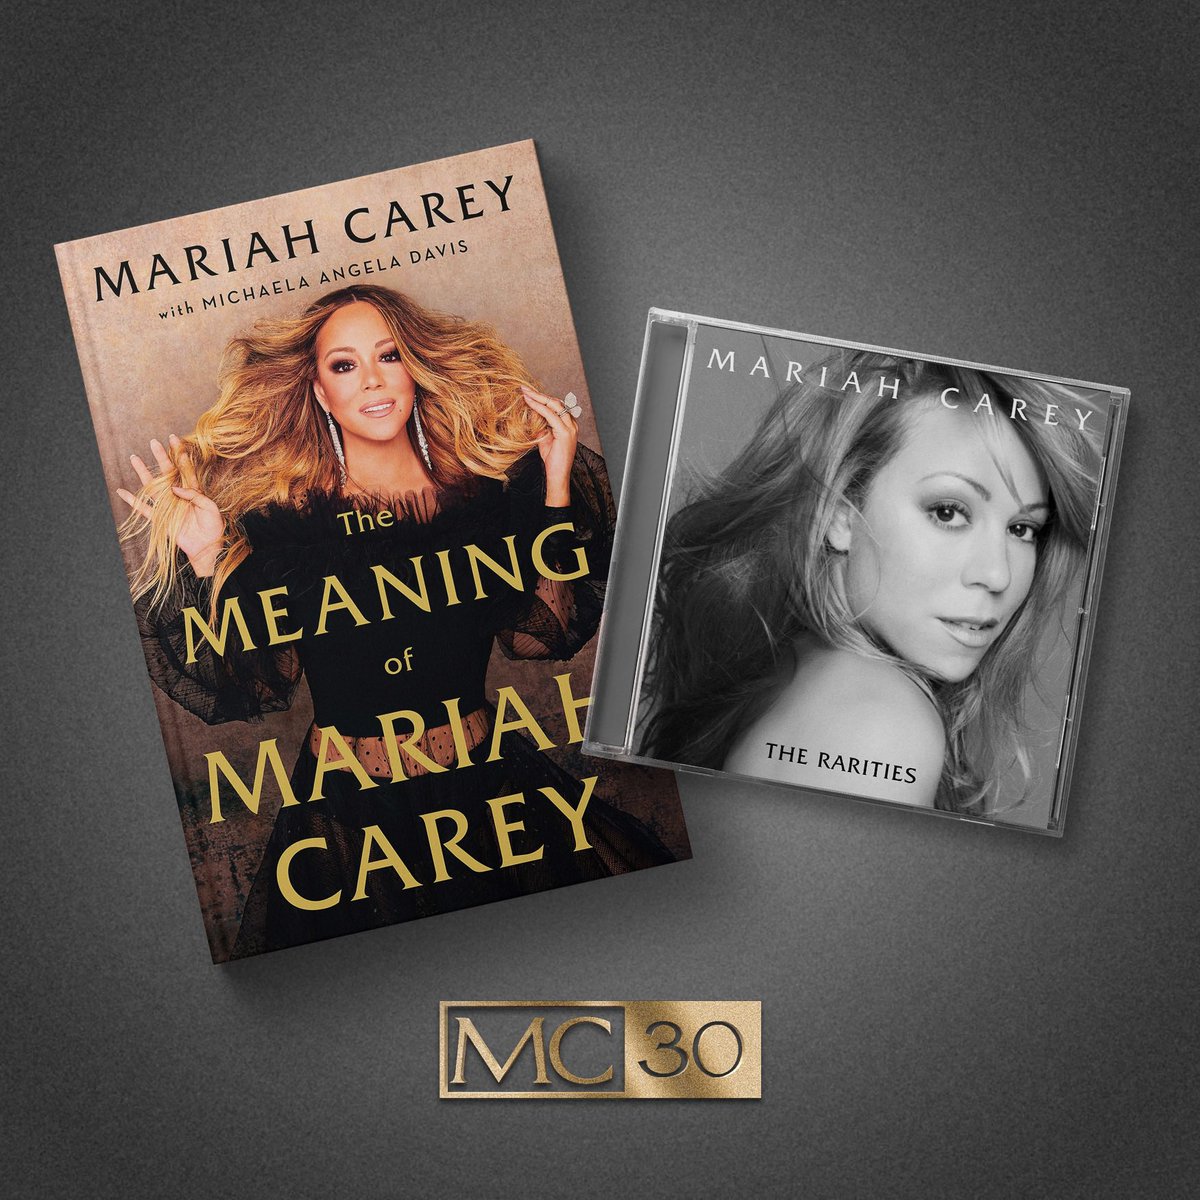 2020 truly is  #YearOfTheLamb! Here's a recap on the latest  @MariahCarey news you might have missed. [THREAD]